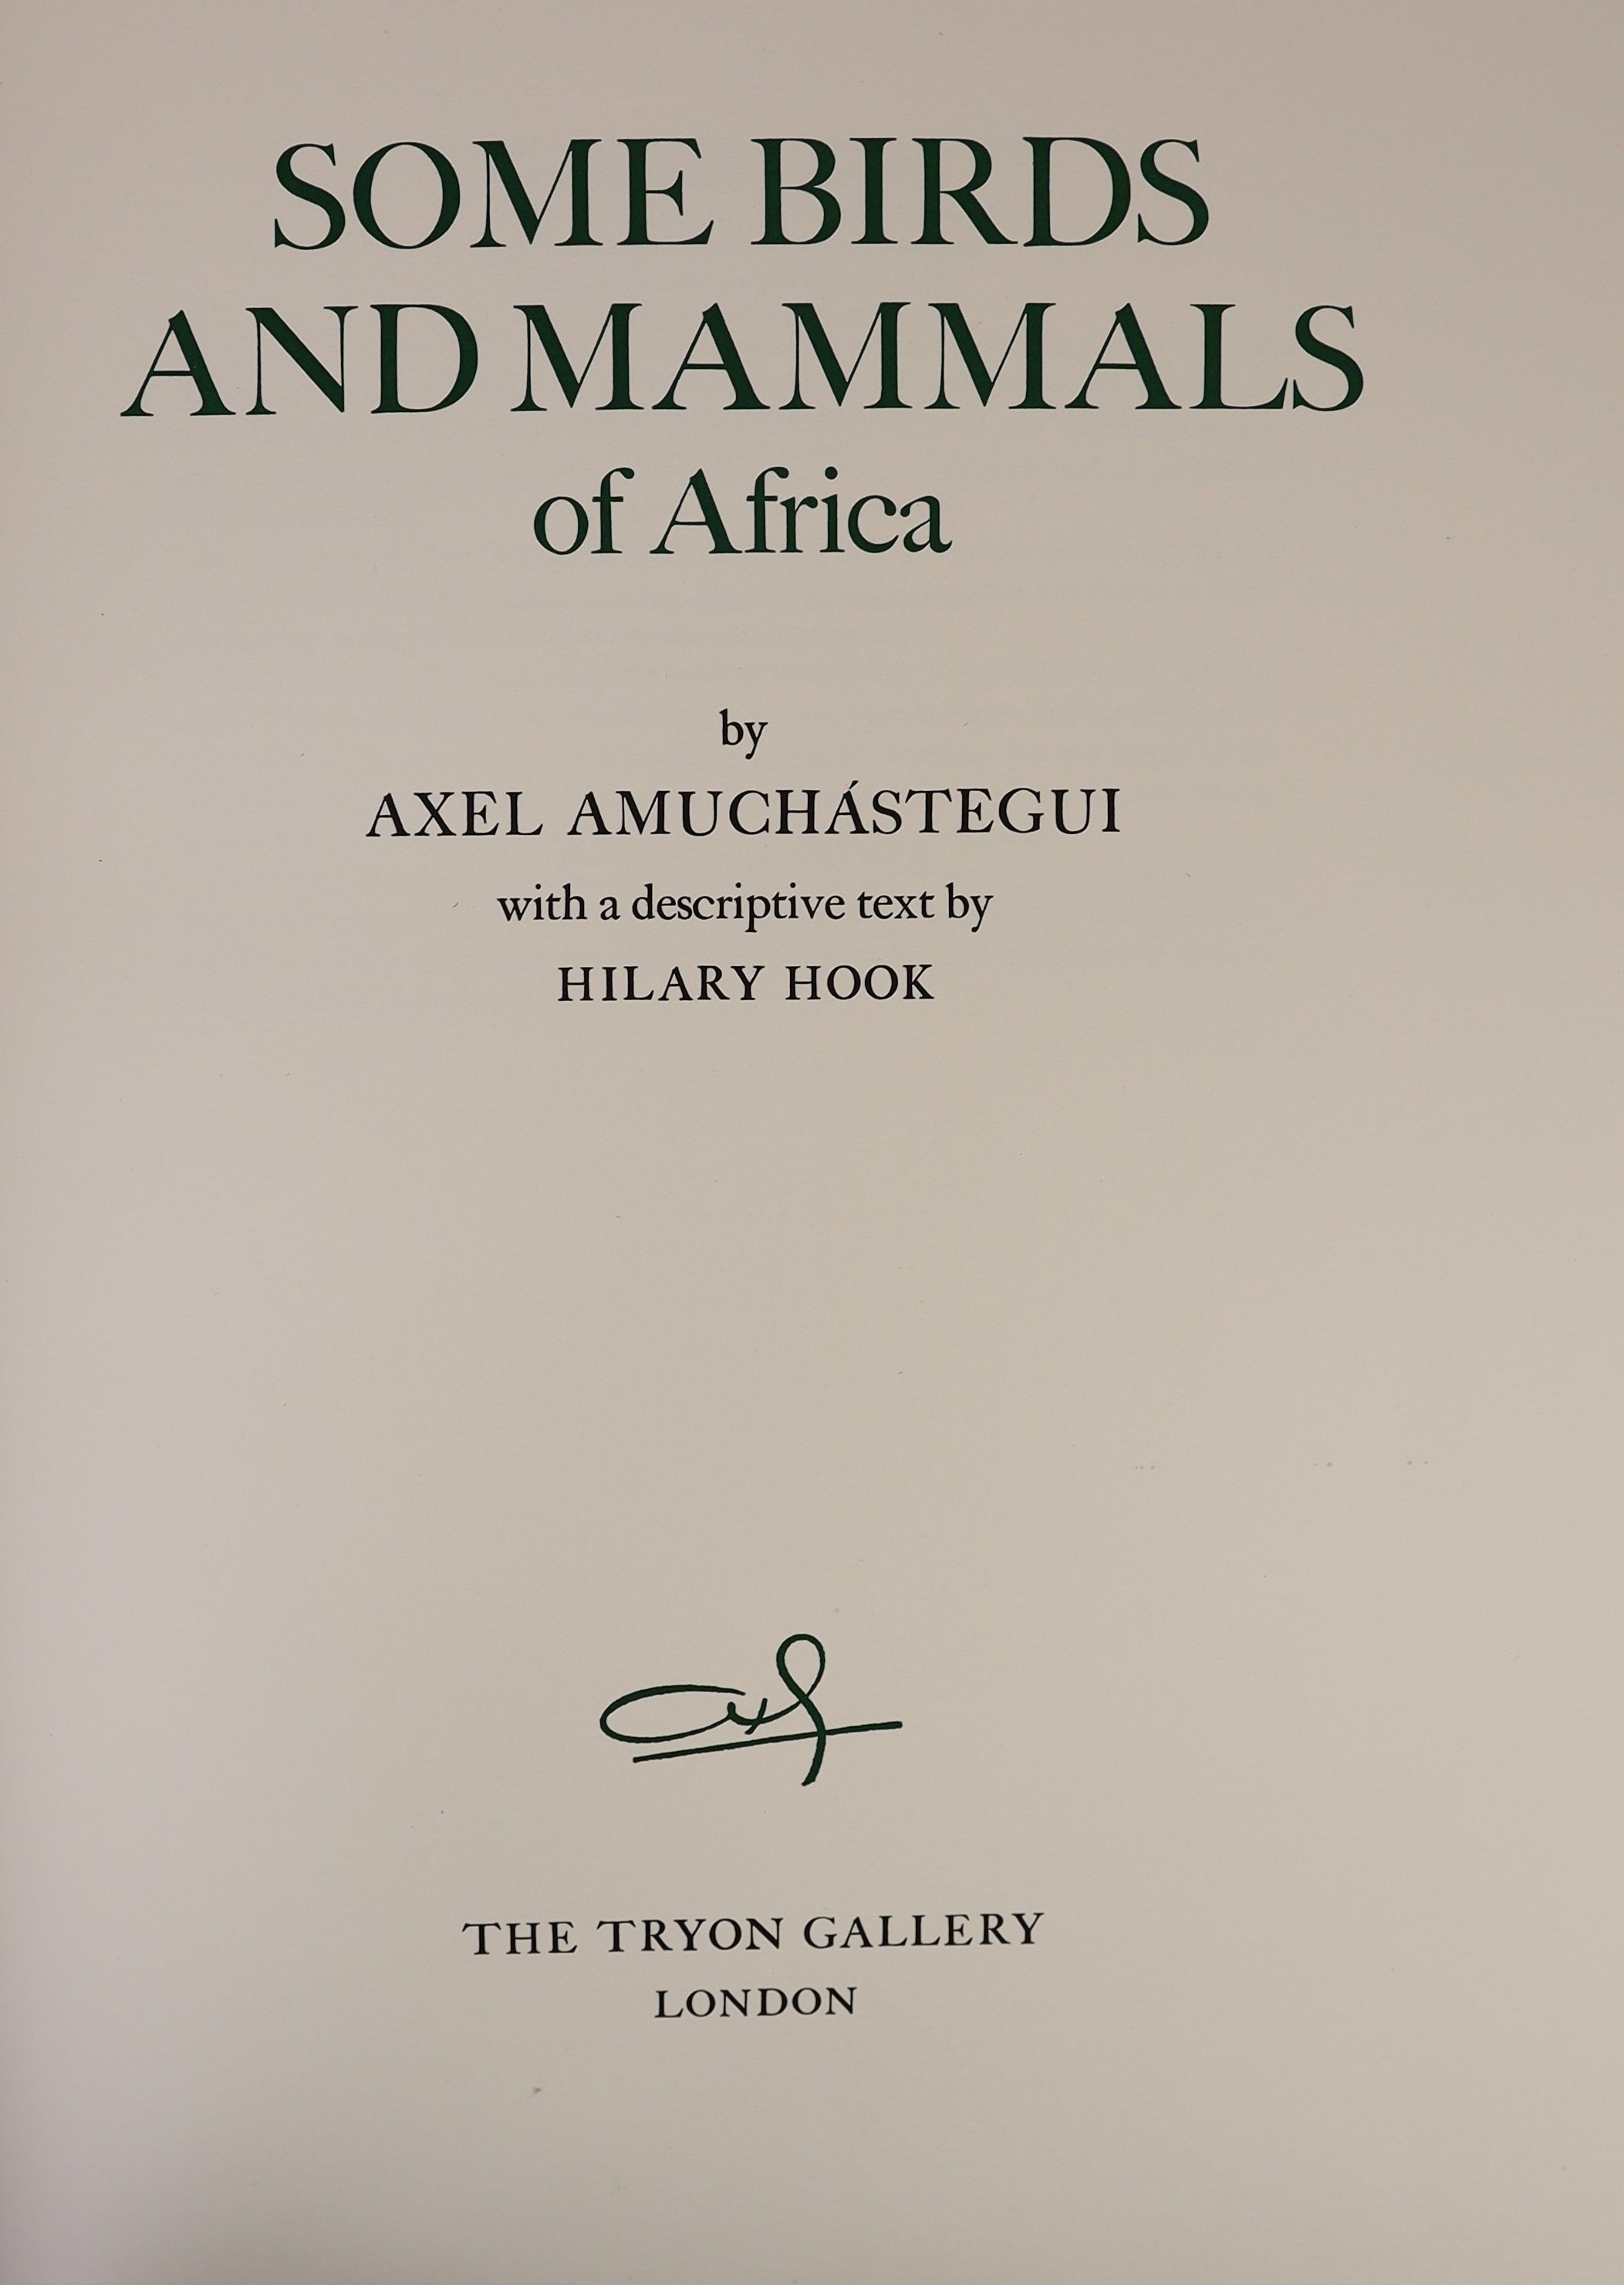 Amuchastegui, Axel - Some Birds and Mamals of Africa, one of 505 signed copies, folio, quarter morocco, illustrated with 14 colour plates by the author, Tryon Gallery, London, 1979, in slip case.